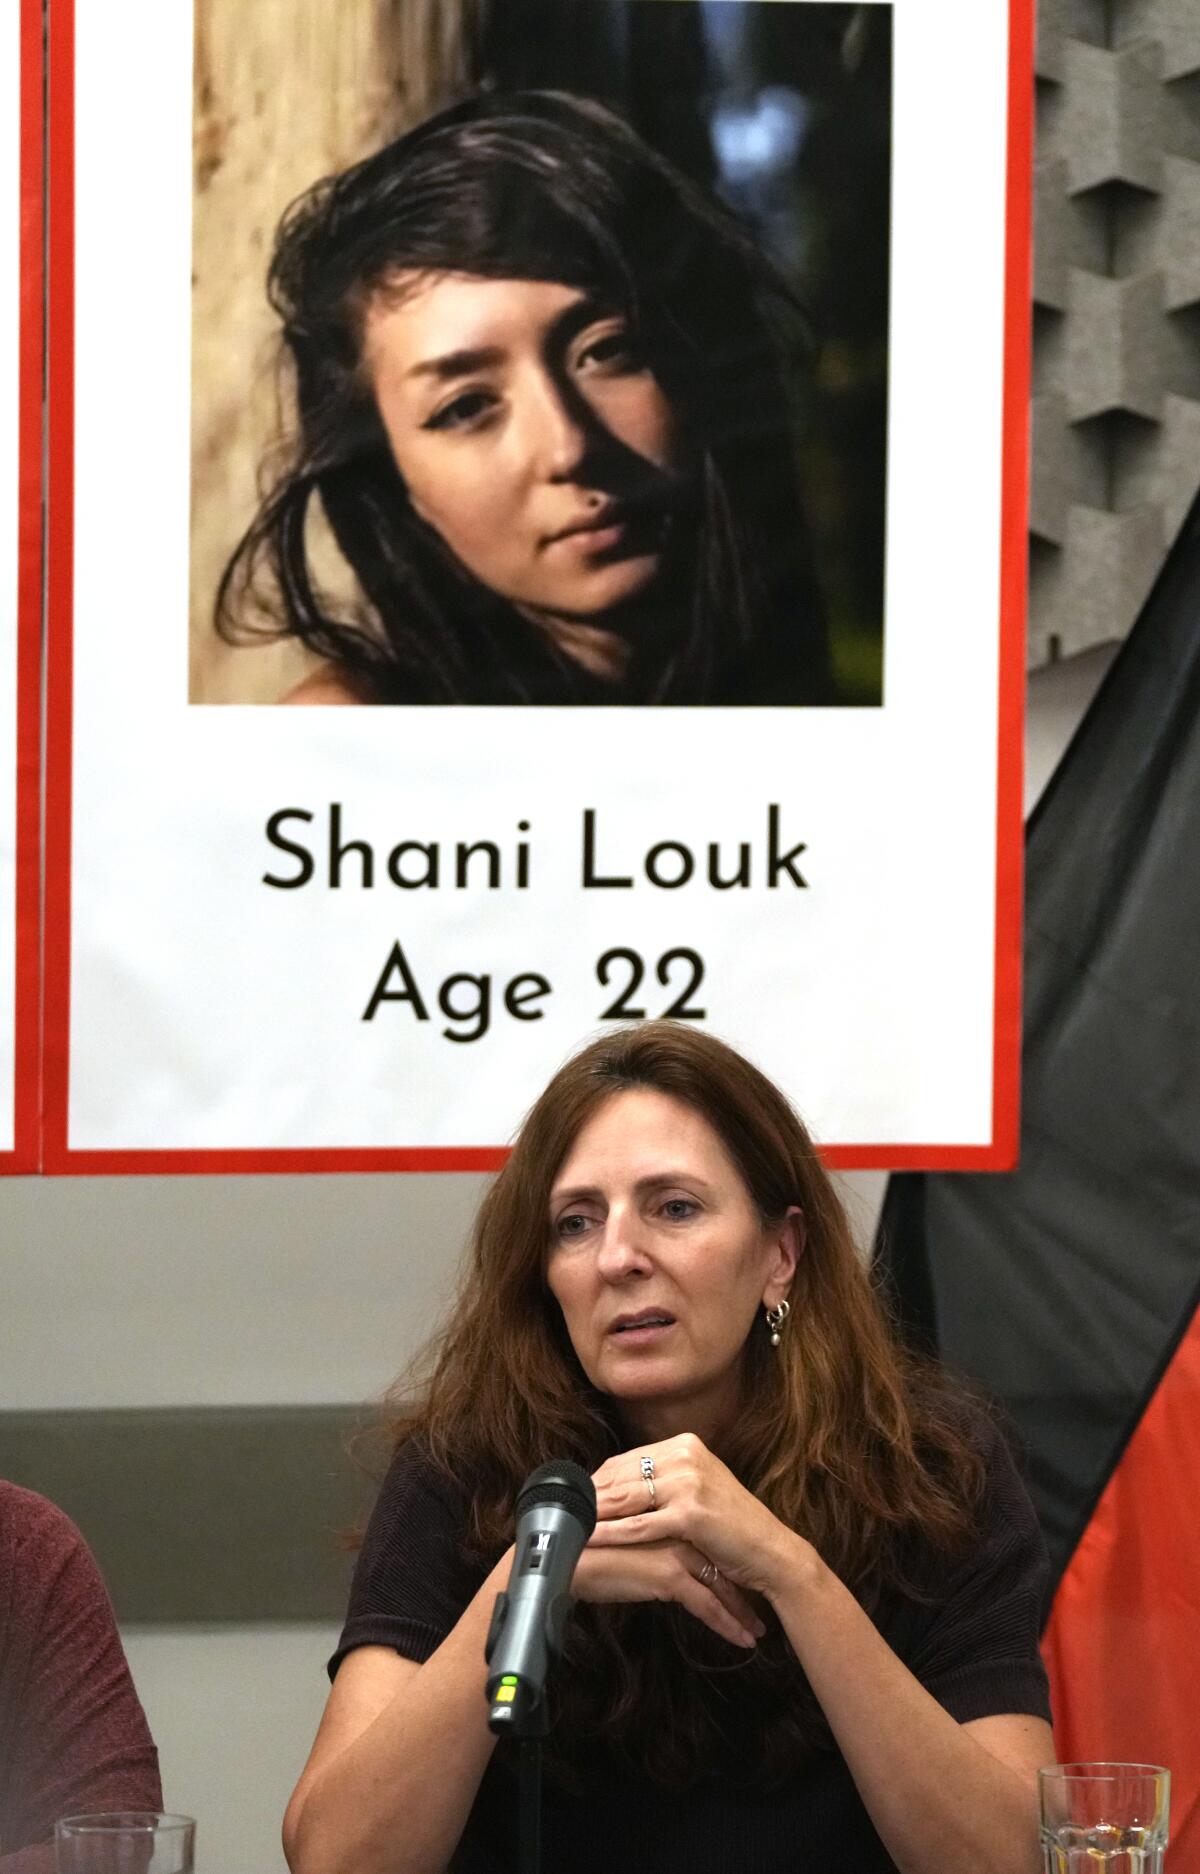 Ricarda Louk sits in front of a placard of her daughter Shani Louk.